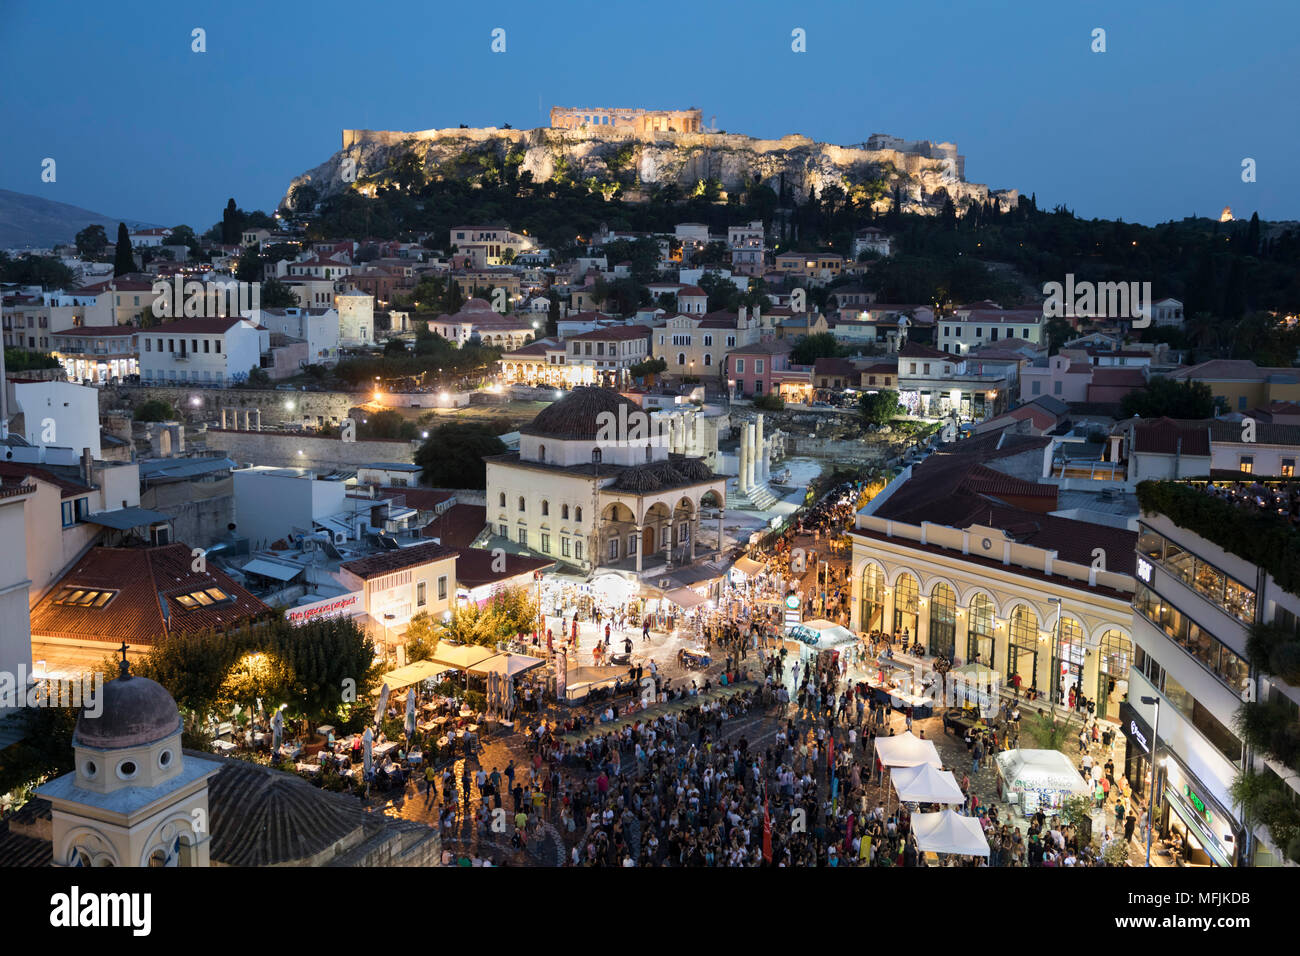 Monastiraki Square with music concert and the Acropolis from roof of A for Athens hotel at night, Monastiraki, Athens, Greece, Europe Stock Photo